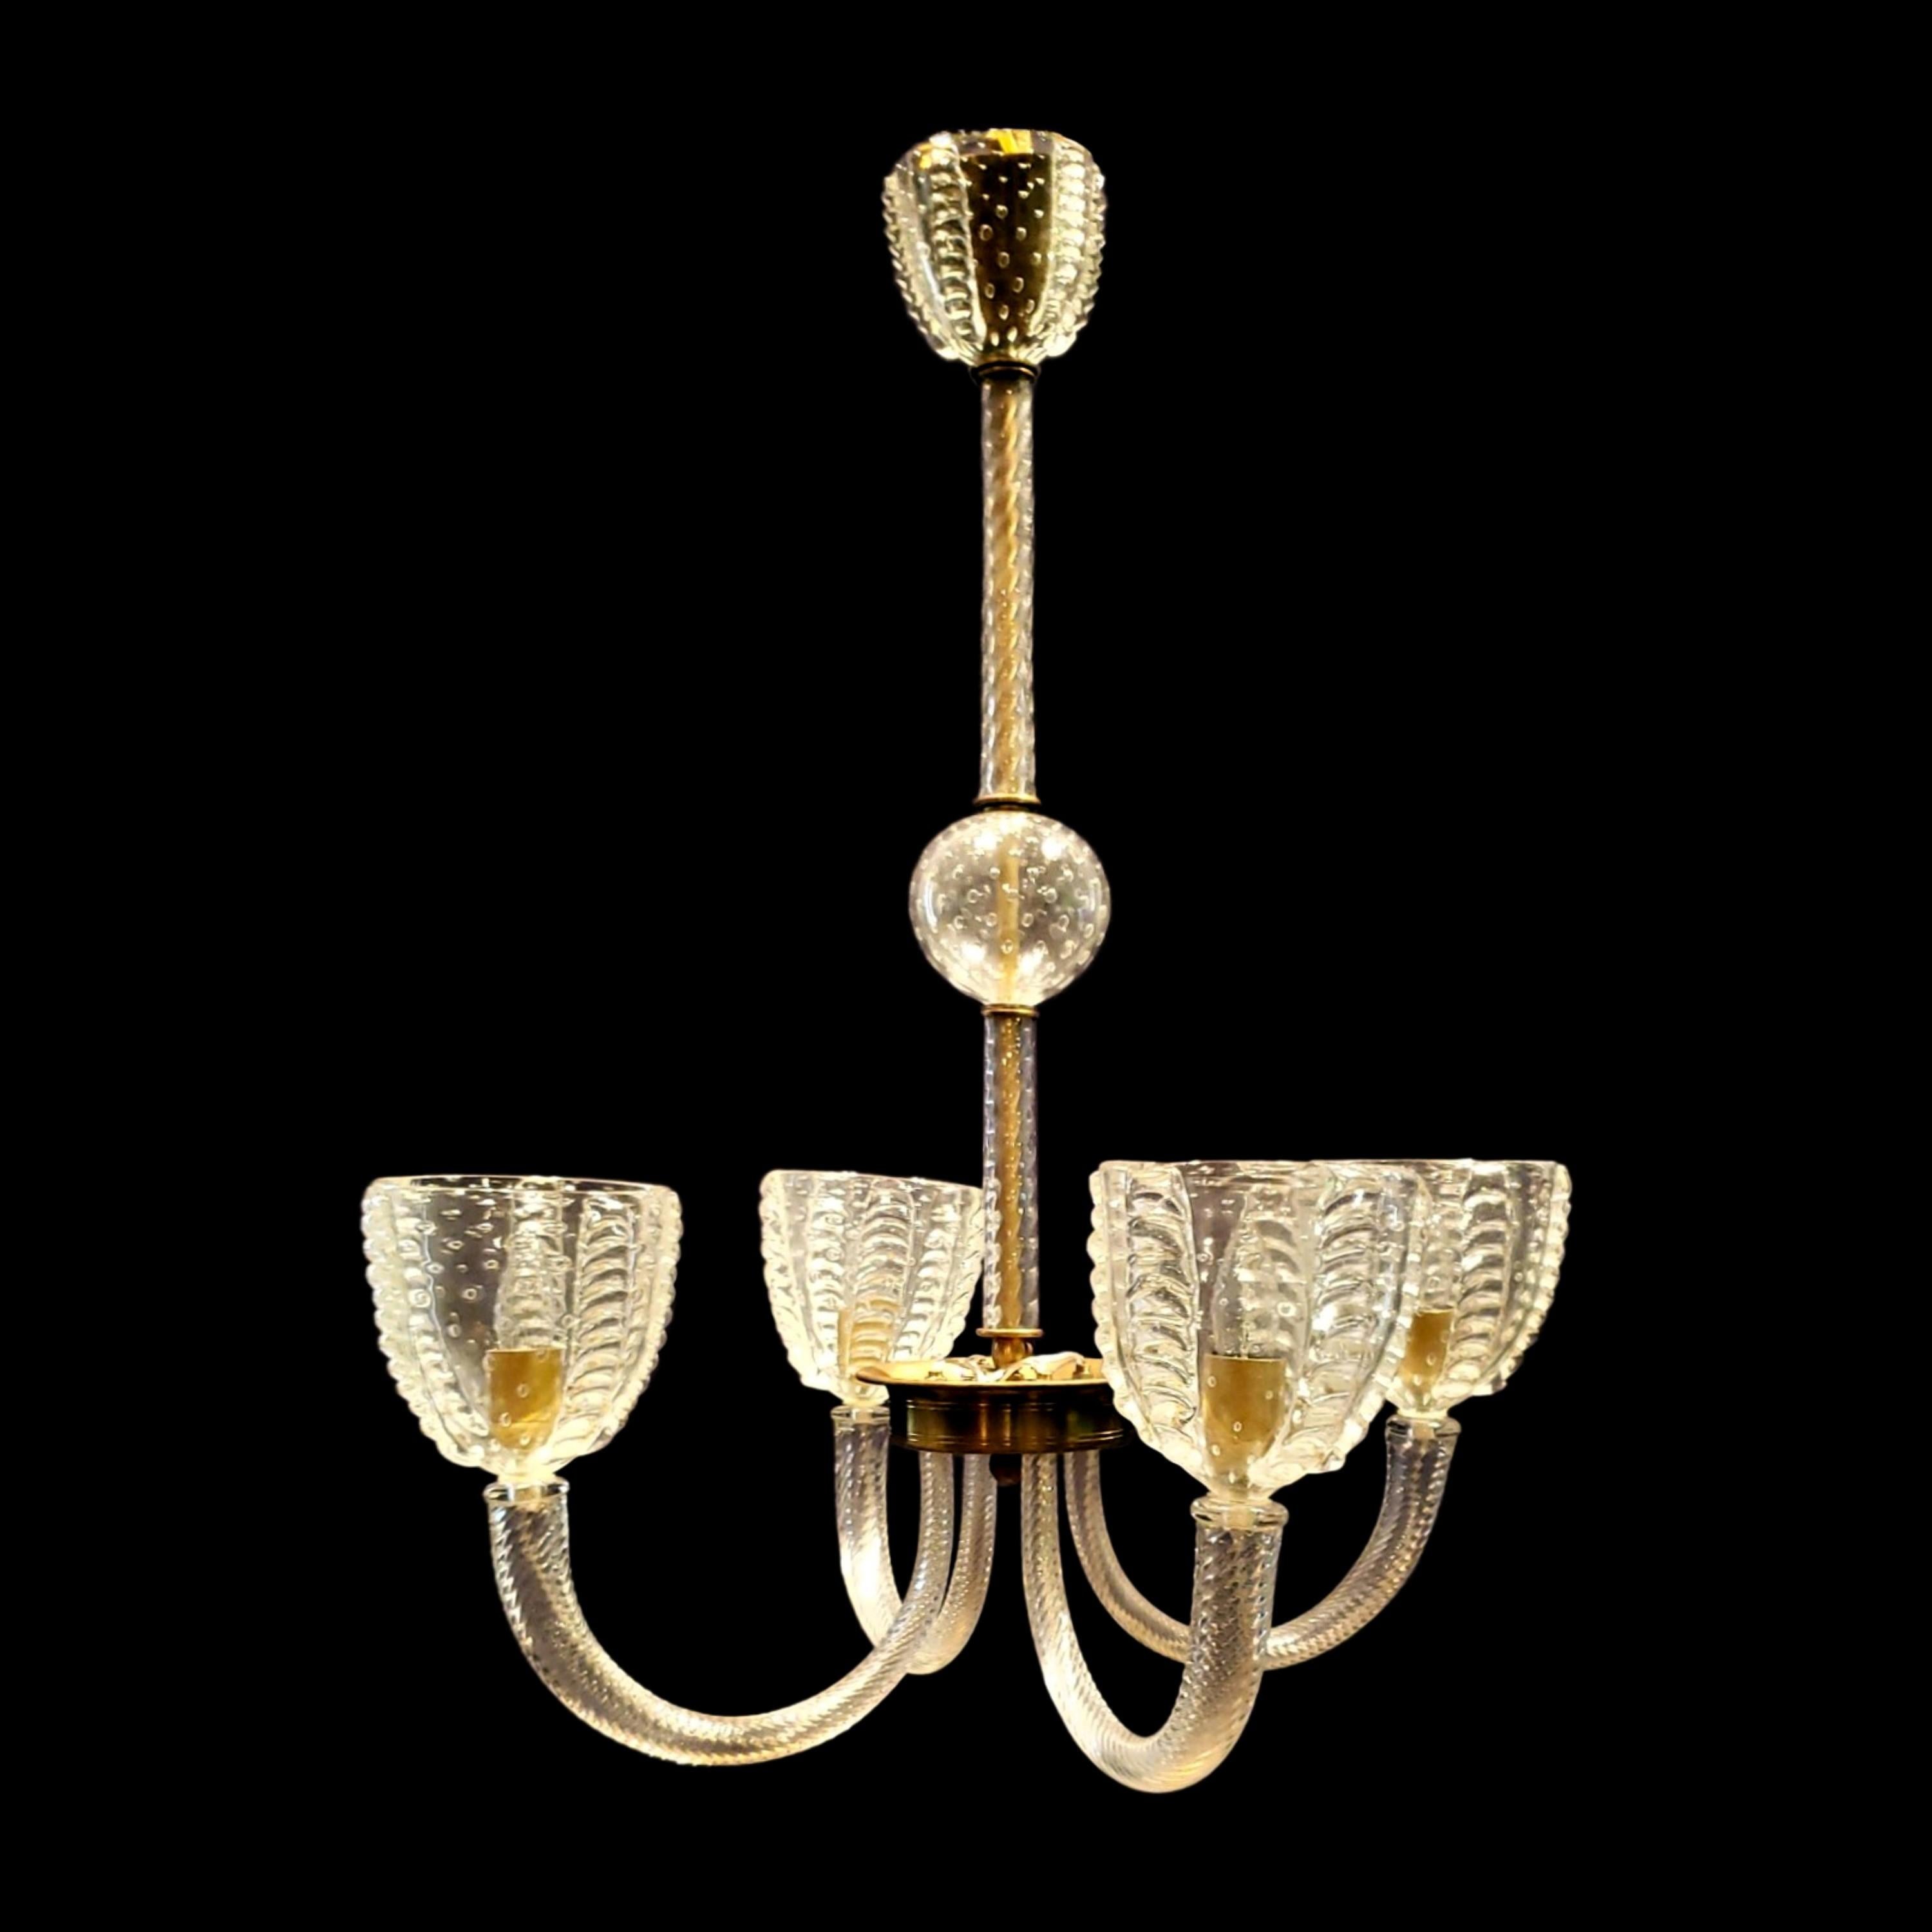 This 1950s Murano hand blown and worked clear glass chandelier features four U shaped arms for a distinctive design. This comes rewired and ready to install. Ships disassembled. Cleaned and restored. Please note, this item is located in one of our